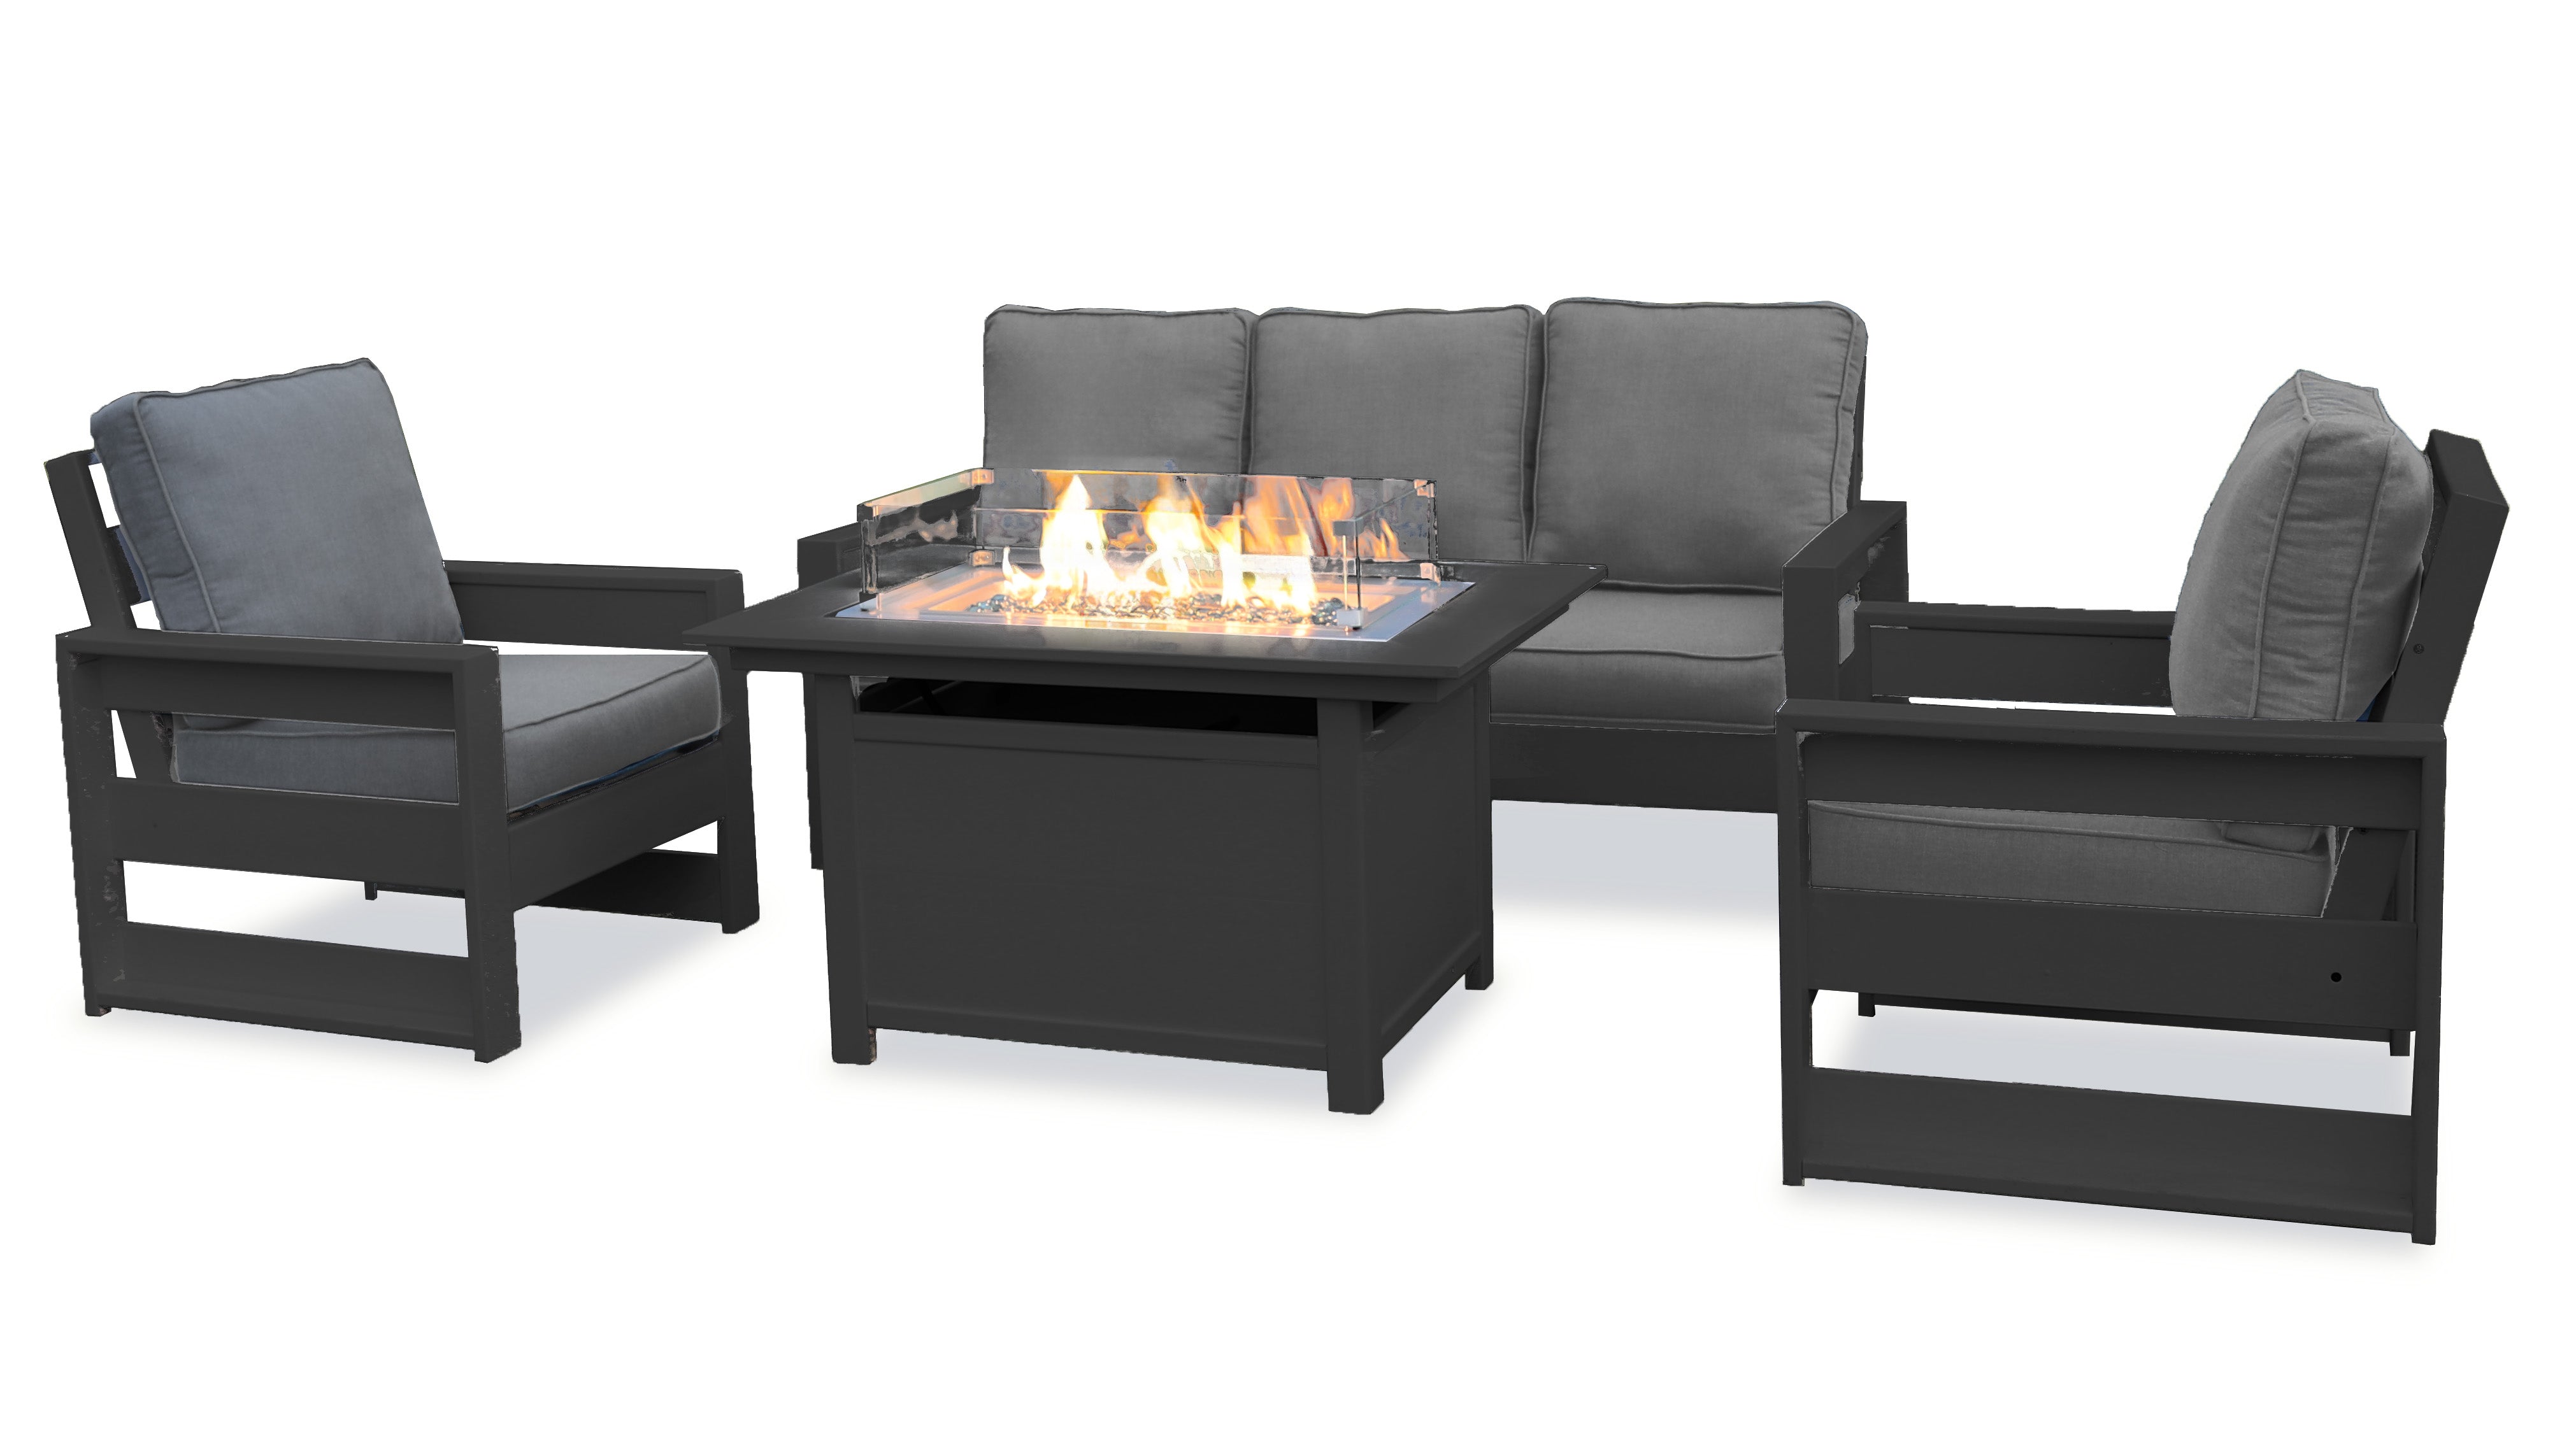 Cortina 25"(H) x 45"(W) Rectangle Fire Pit Table with Pacifica Sofa Set, 4-Piece